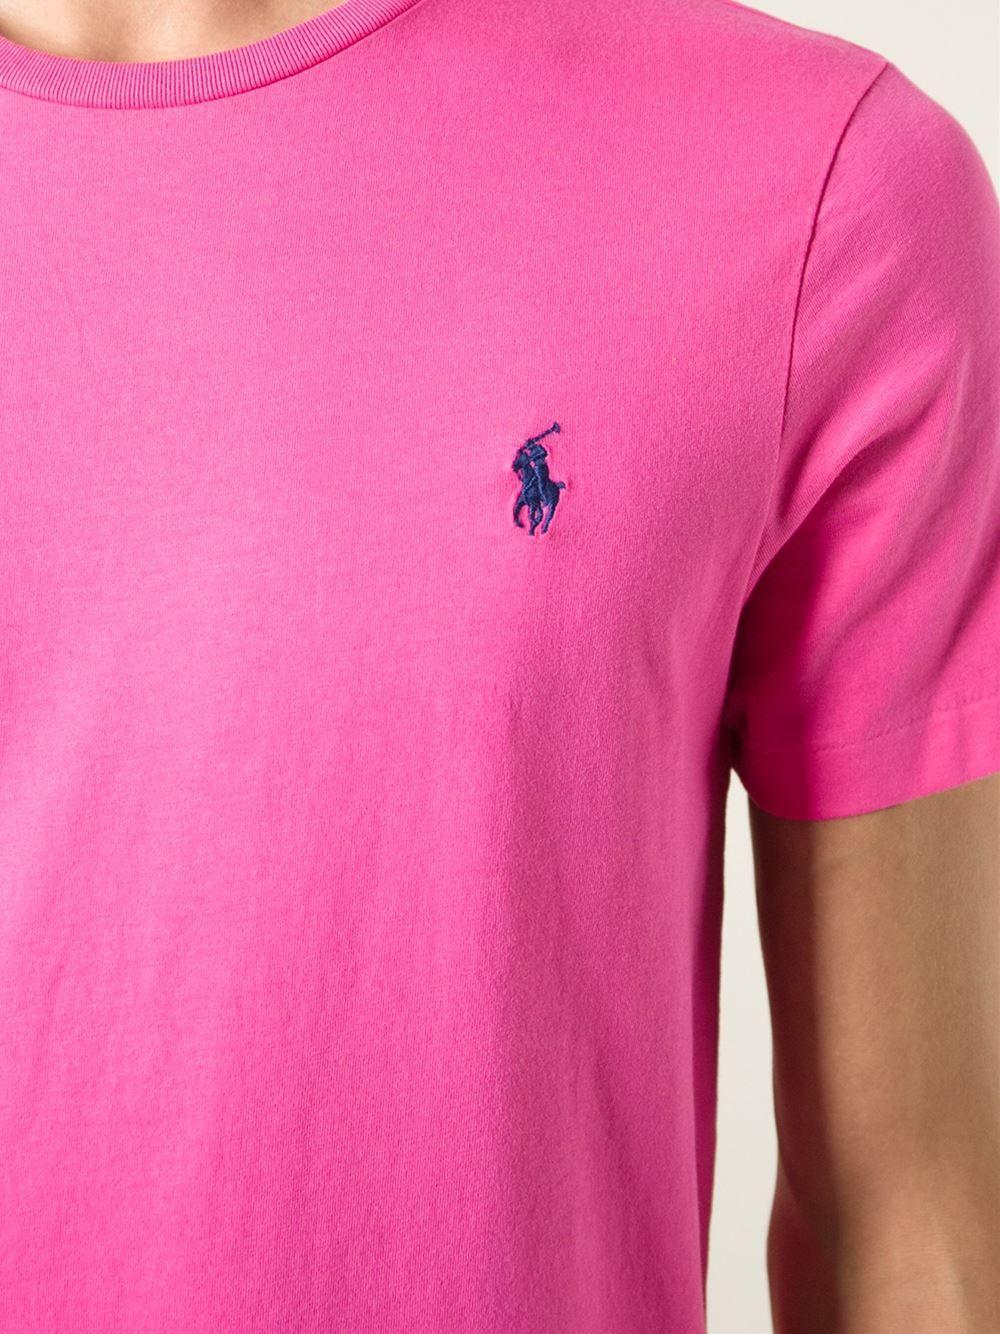 Pink Polo Logo - Polo Ralph Lauren Logo Embroidered T-Shirt in Pink for Men - Lyst